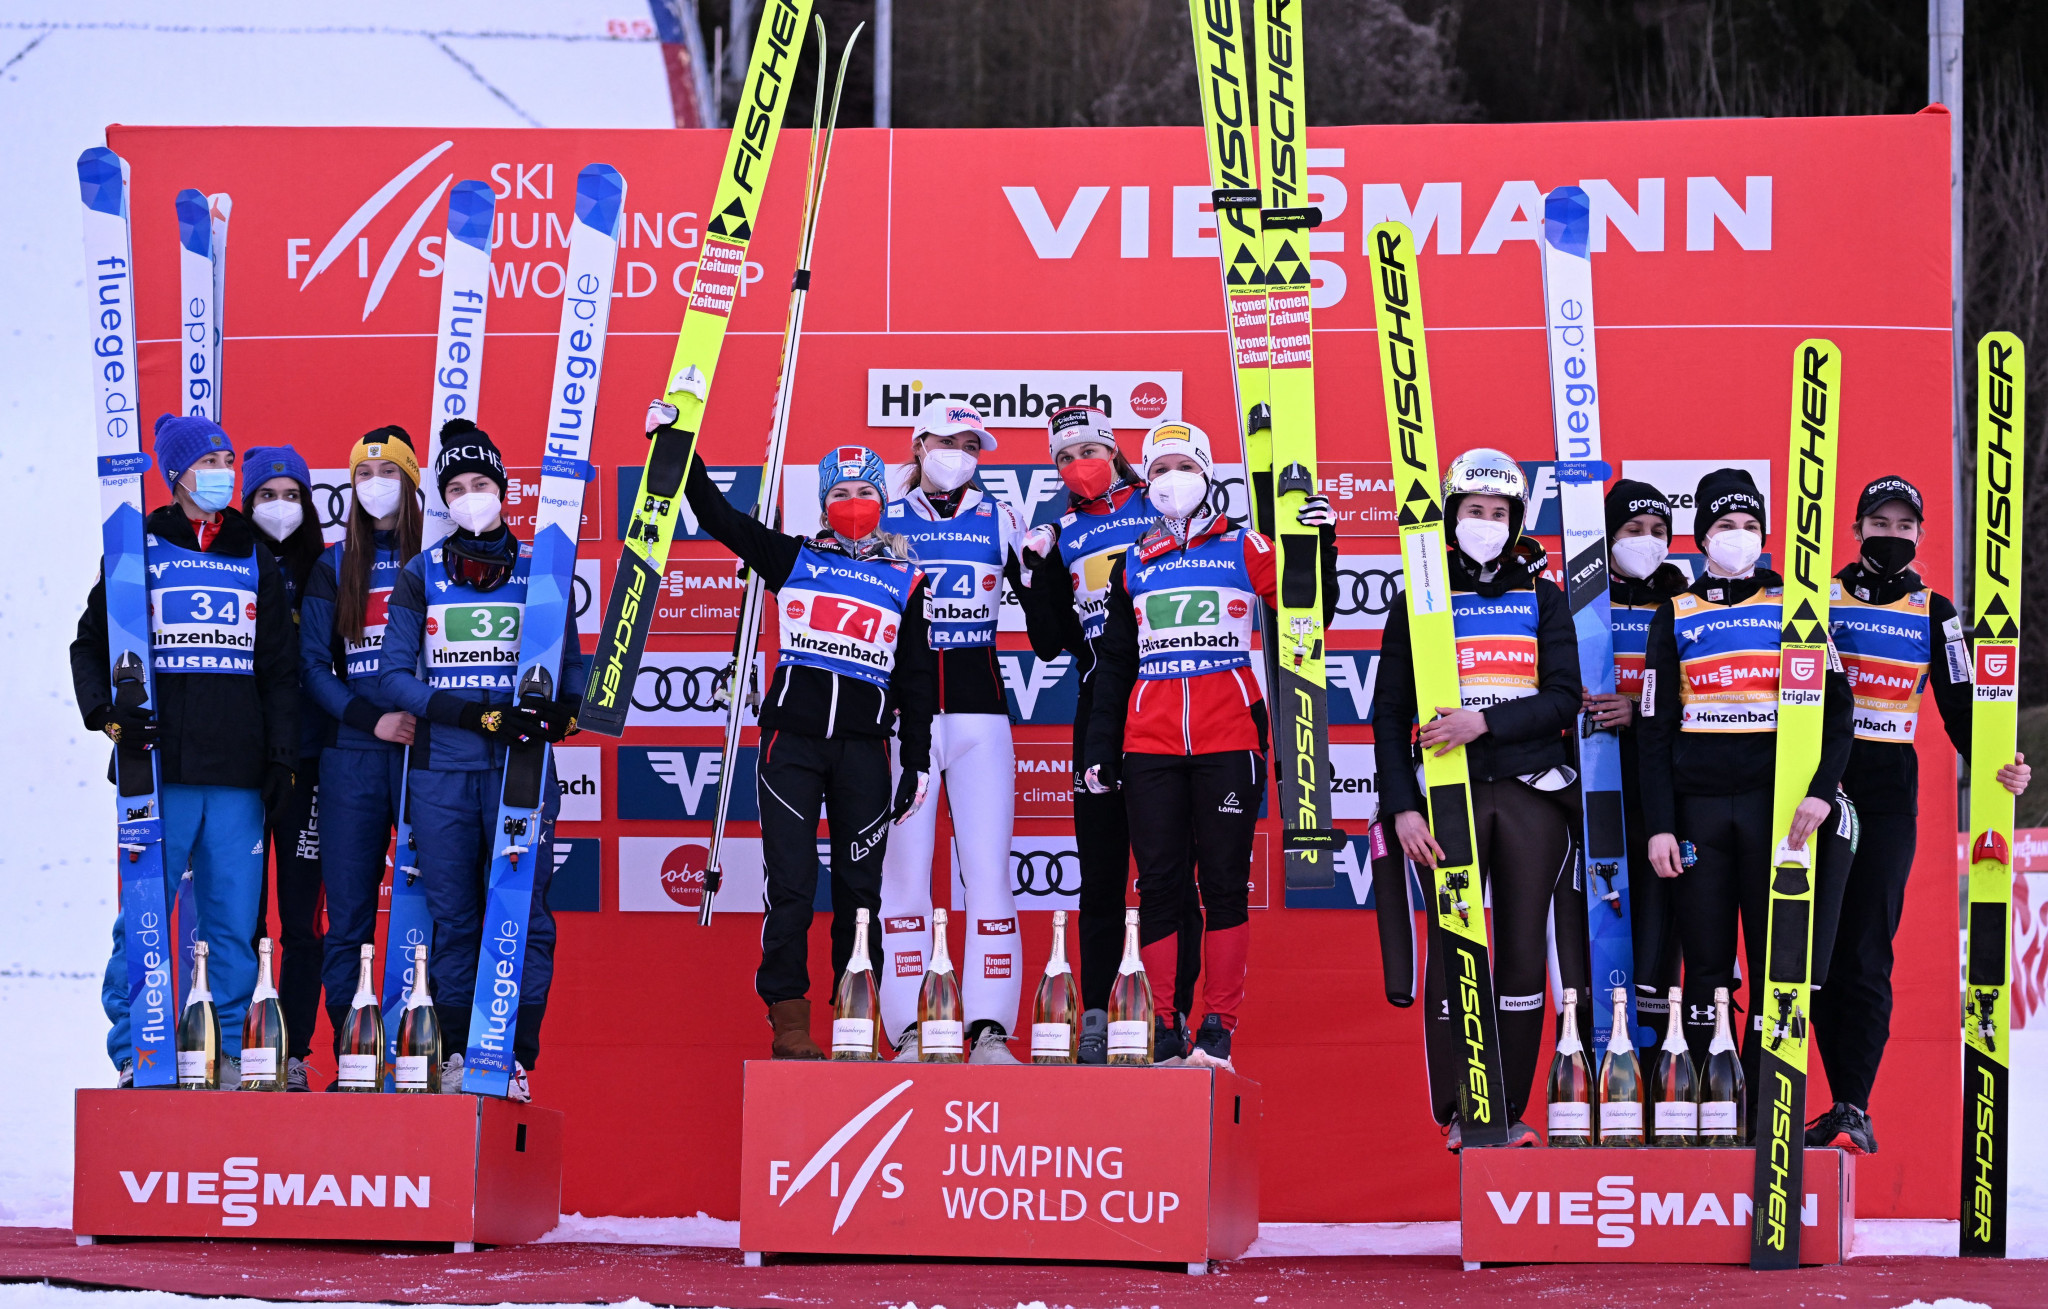 Austria triumph in women’s team competition on opening day of Ski Jumping World Cup in Hinzenbach